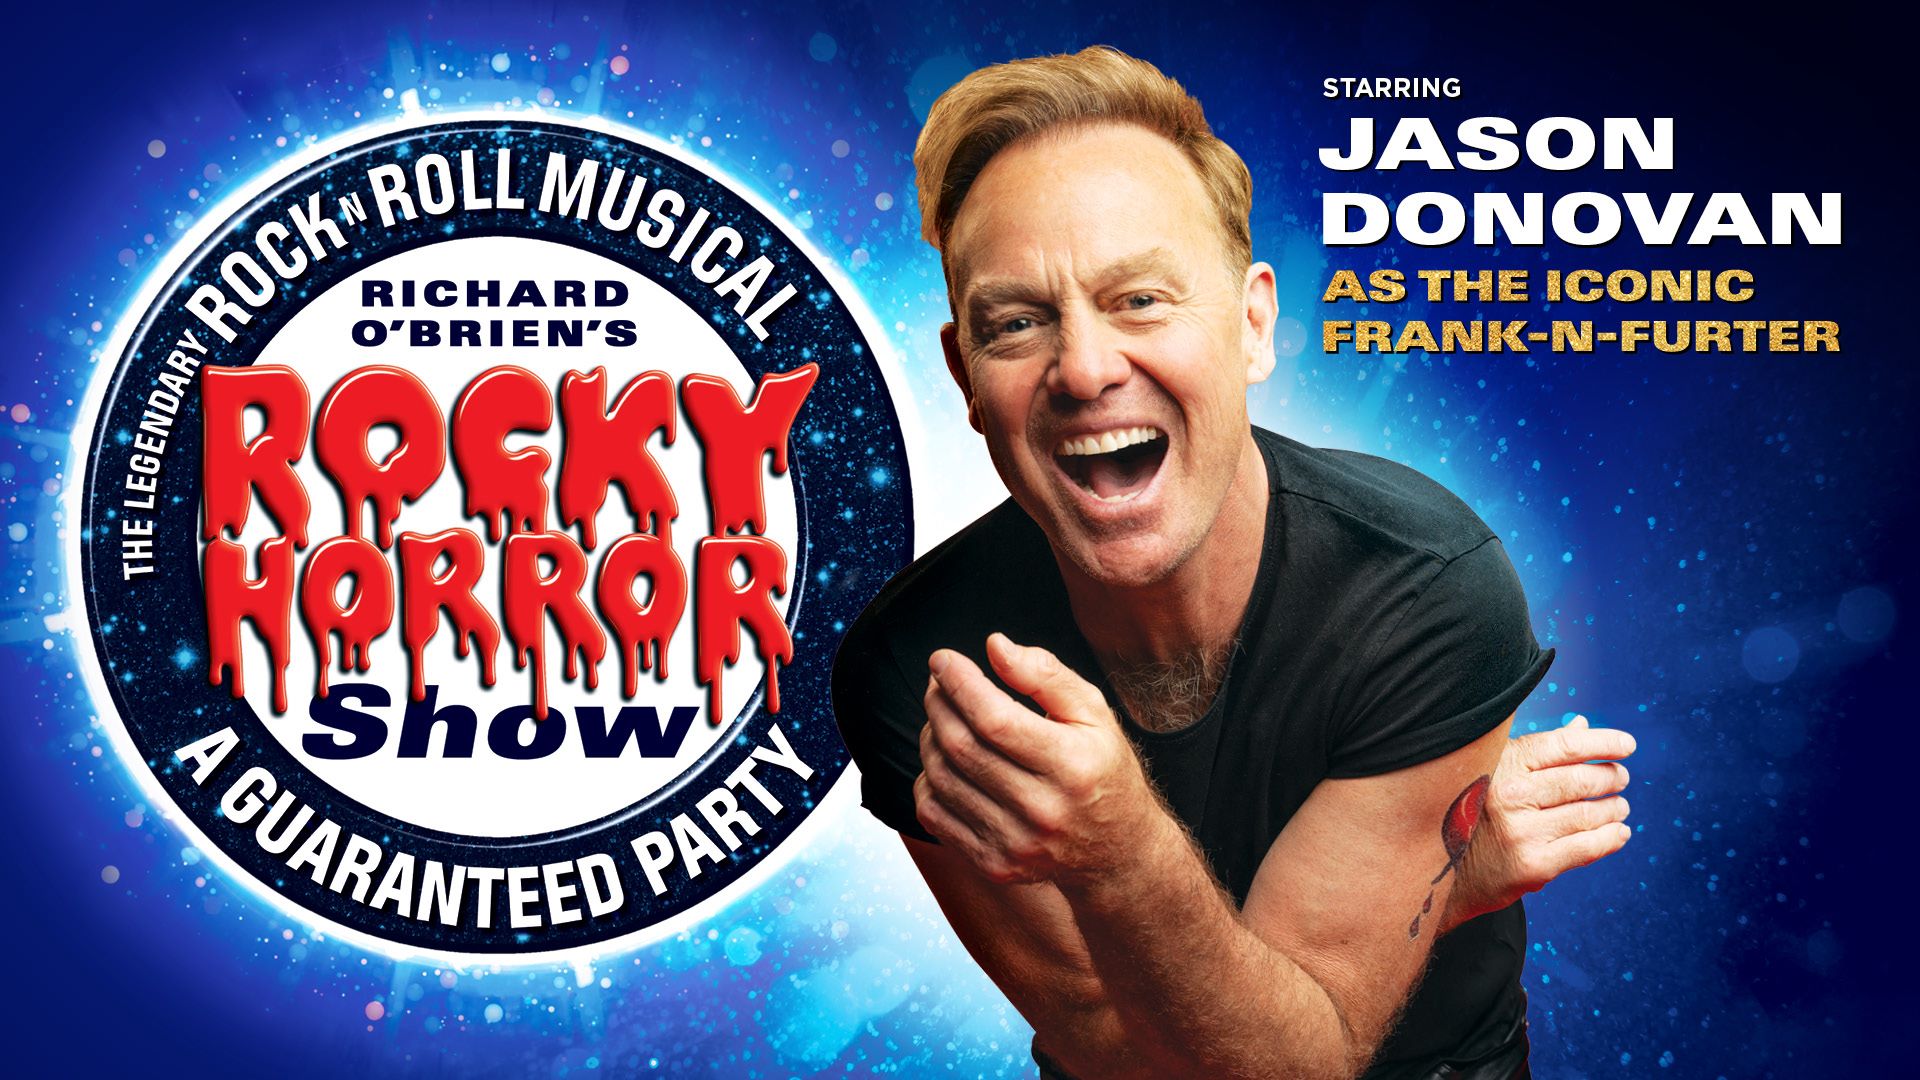 Jason Donovan in The Rocky Horror Picture Show poster